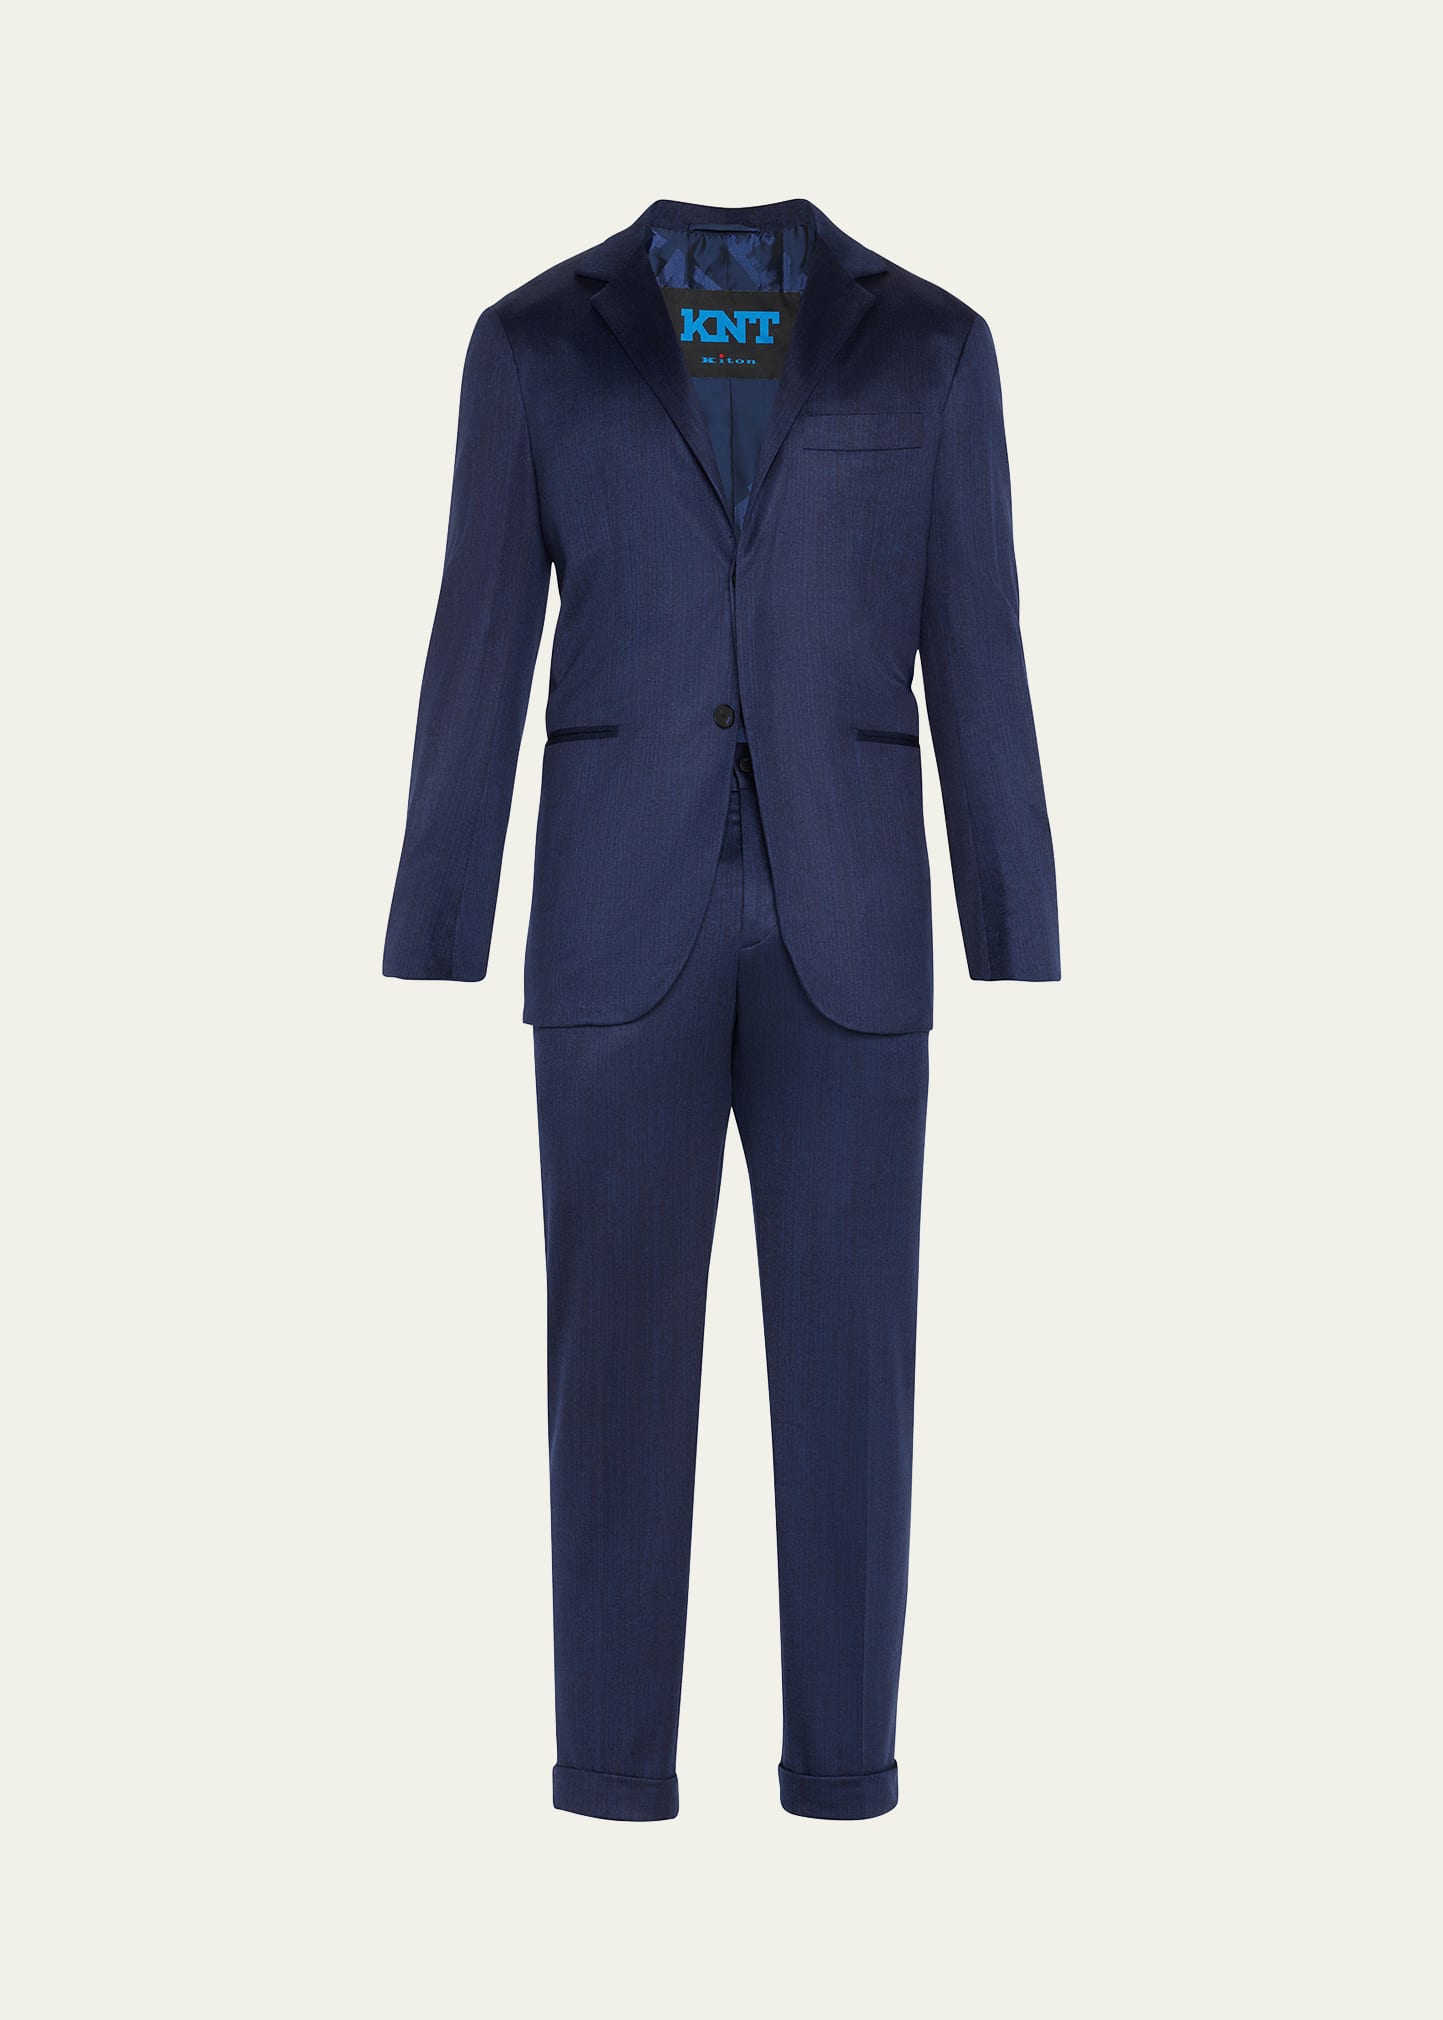 KNT Men's Printed Wool Two-Piece Suit